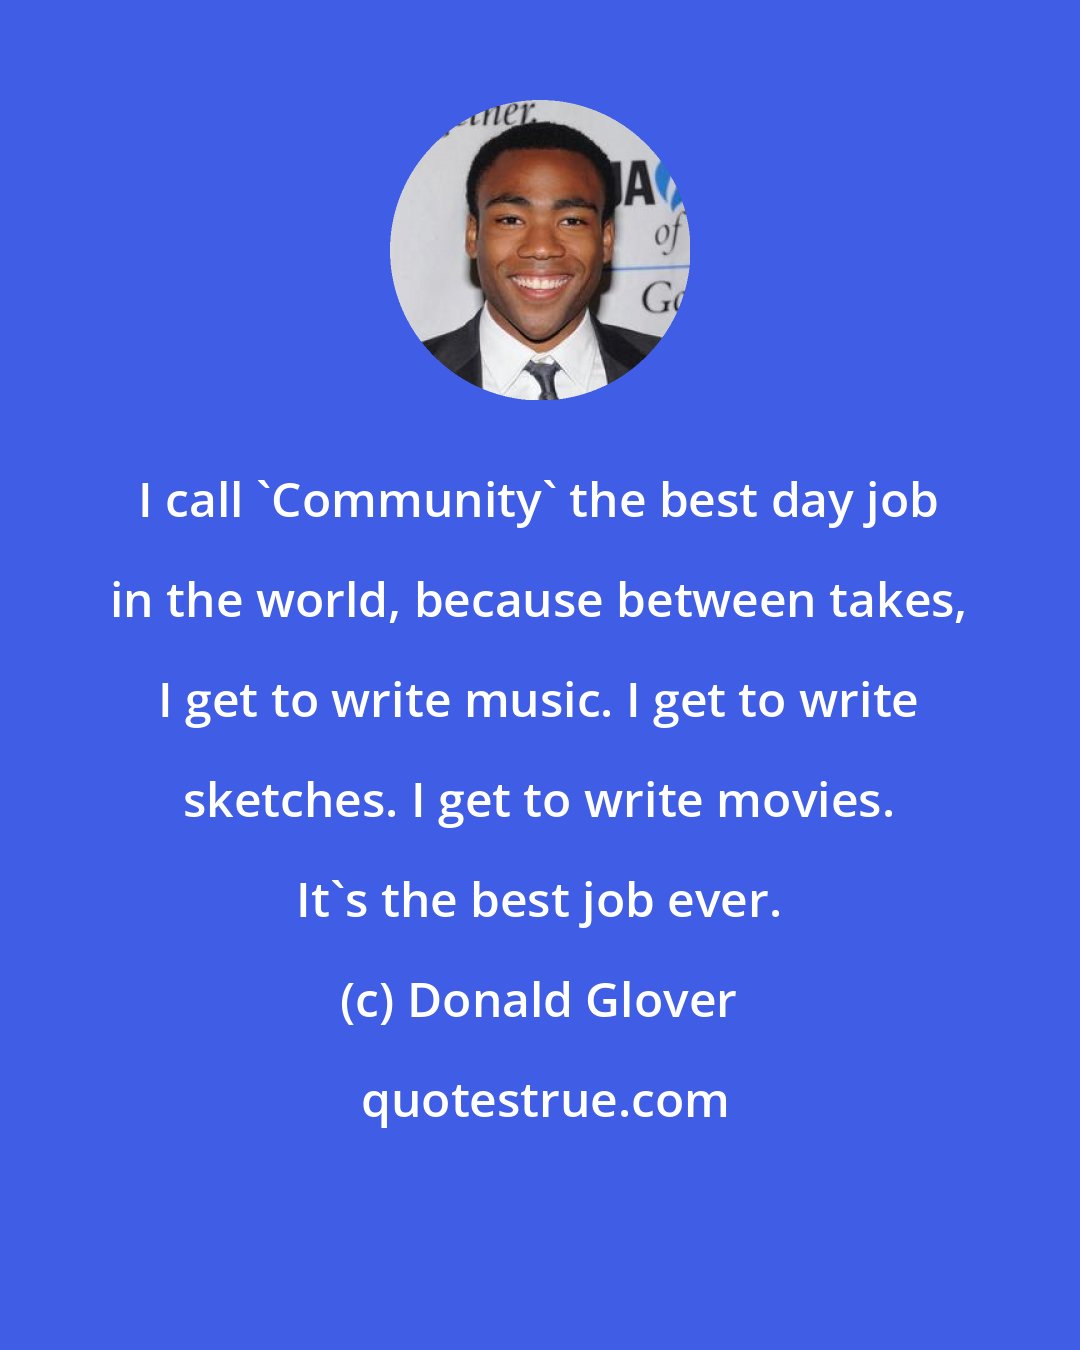 Donald Glover: I call 'Community' the best day job in the world, because between takes, I get to write music. I get to write sketches. I get to write movies. It's the best job ever.